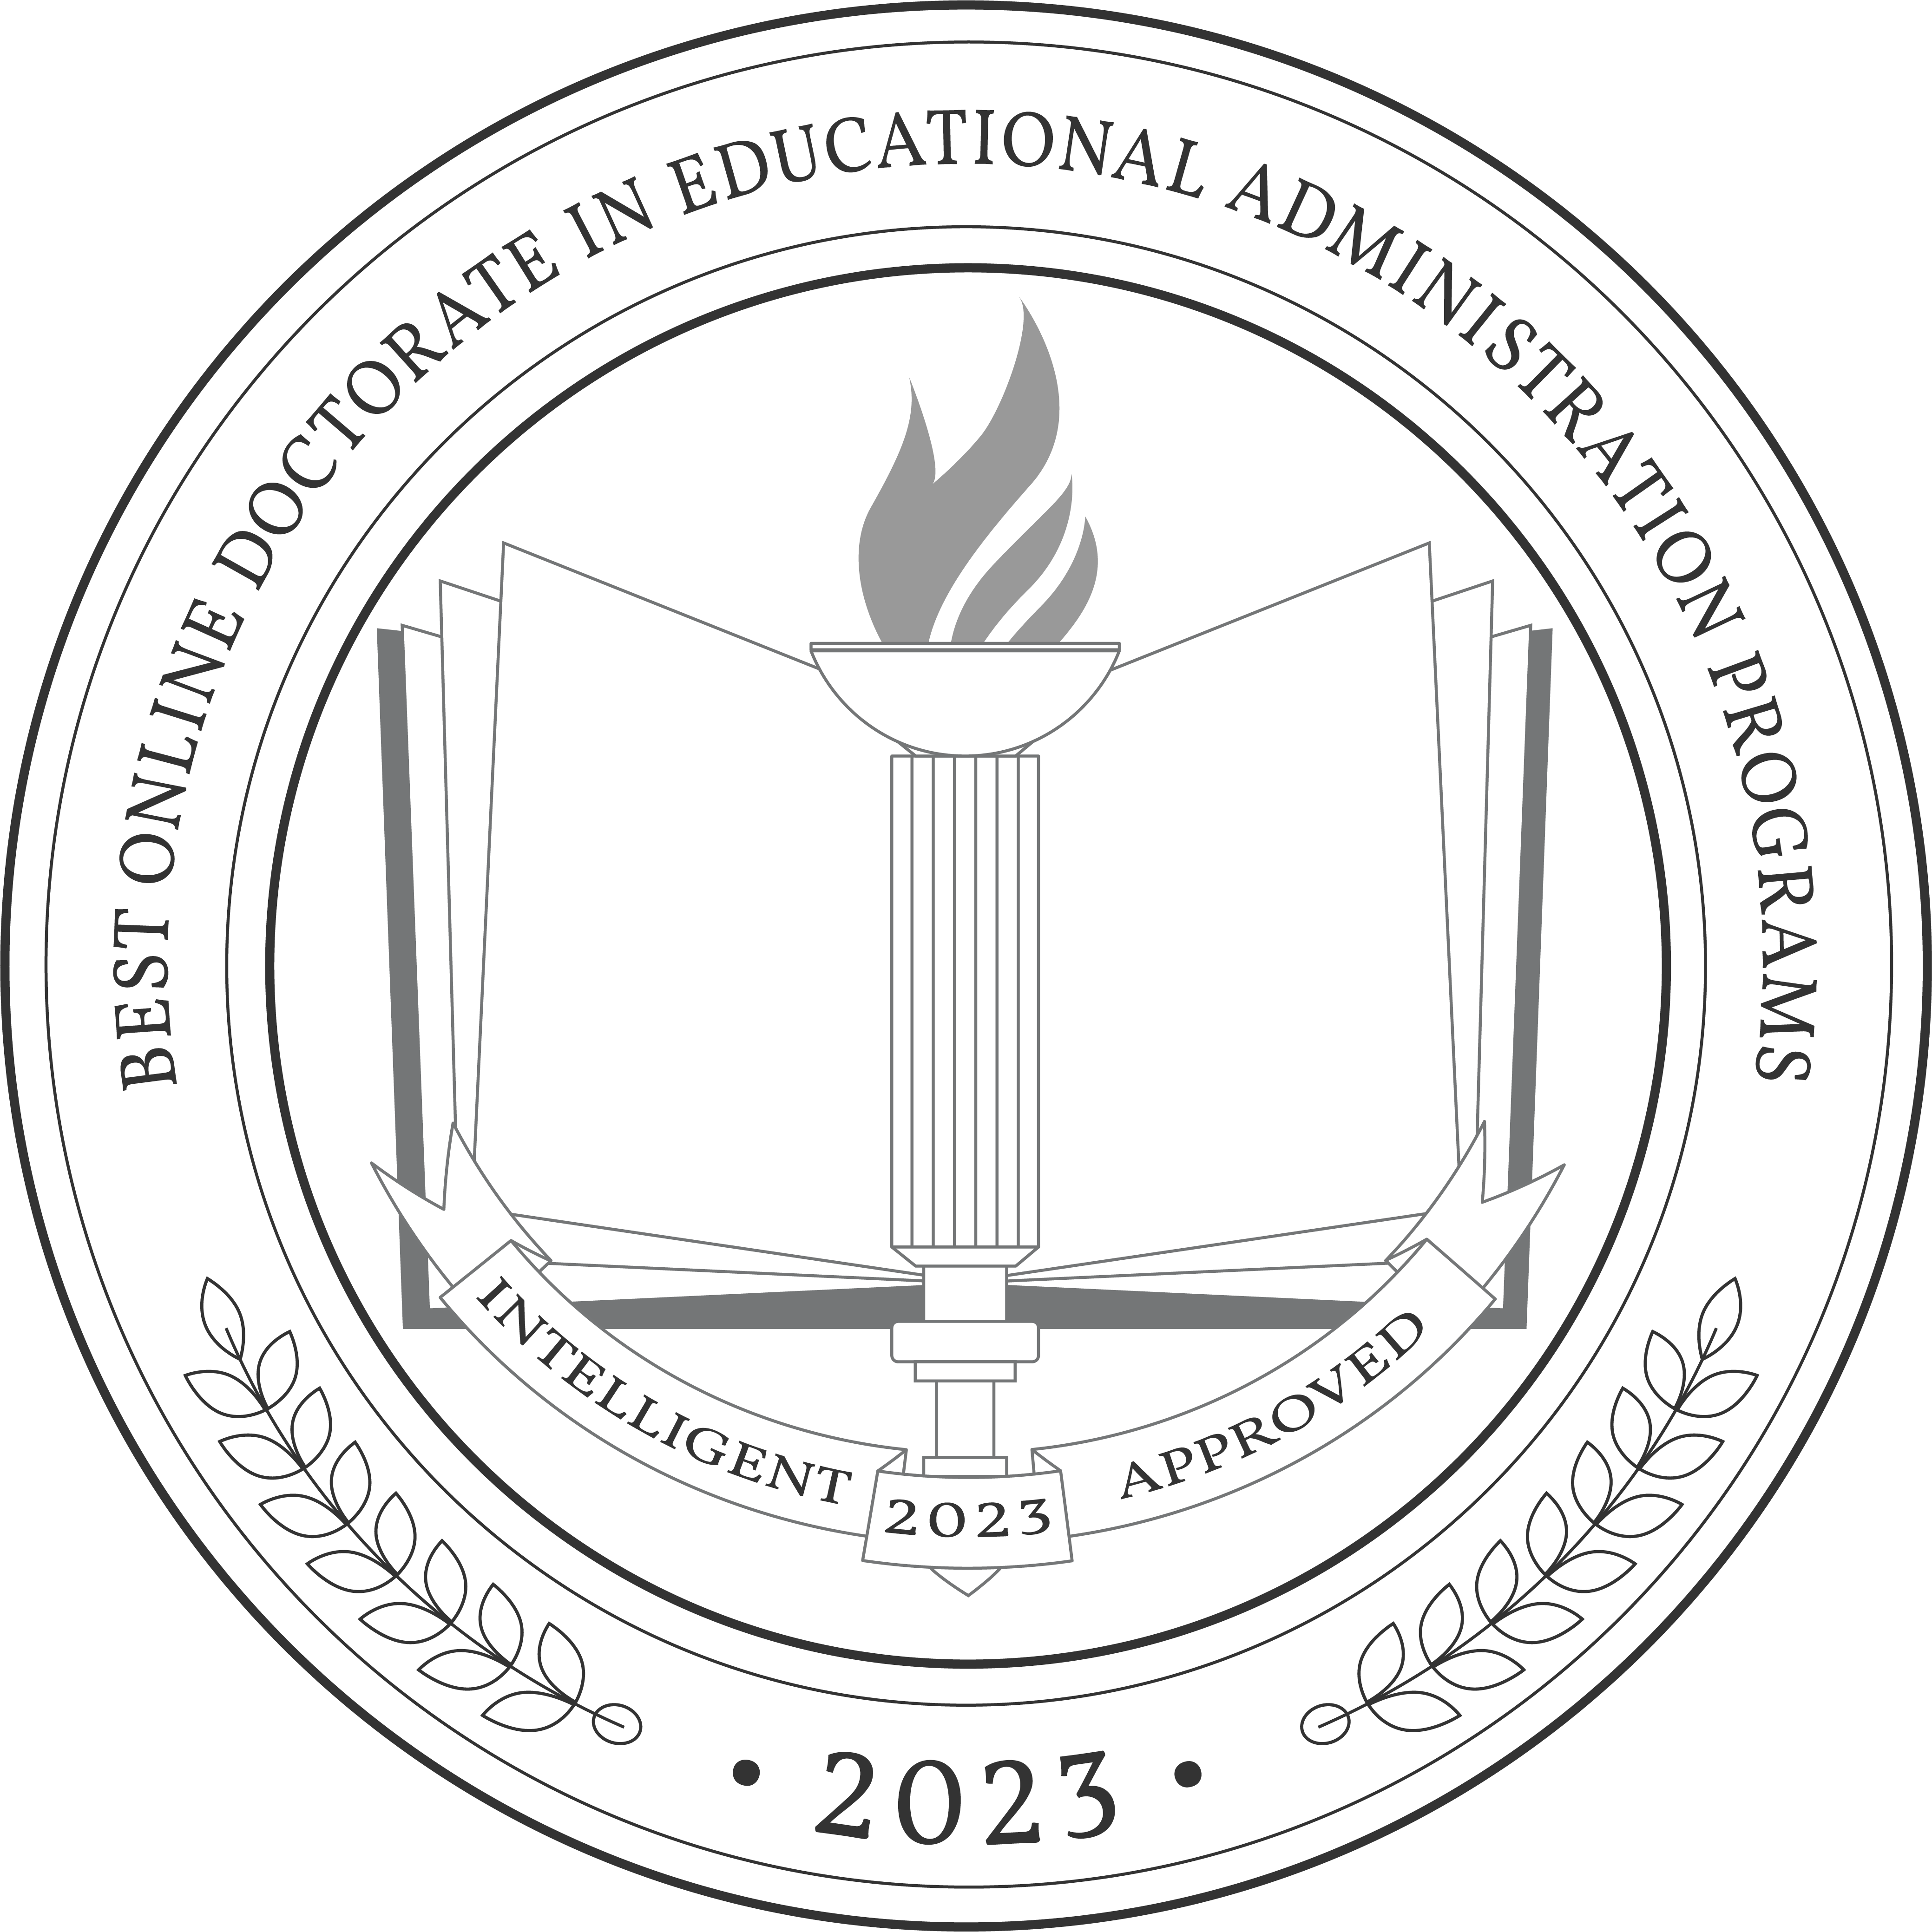 doctorate education administration